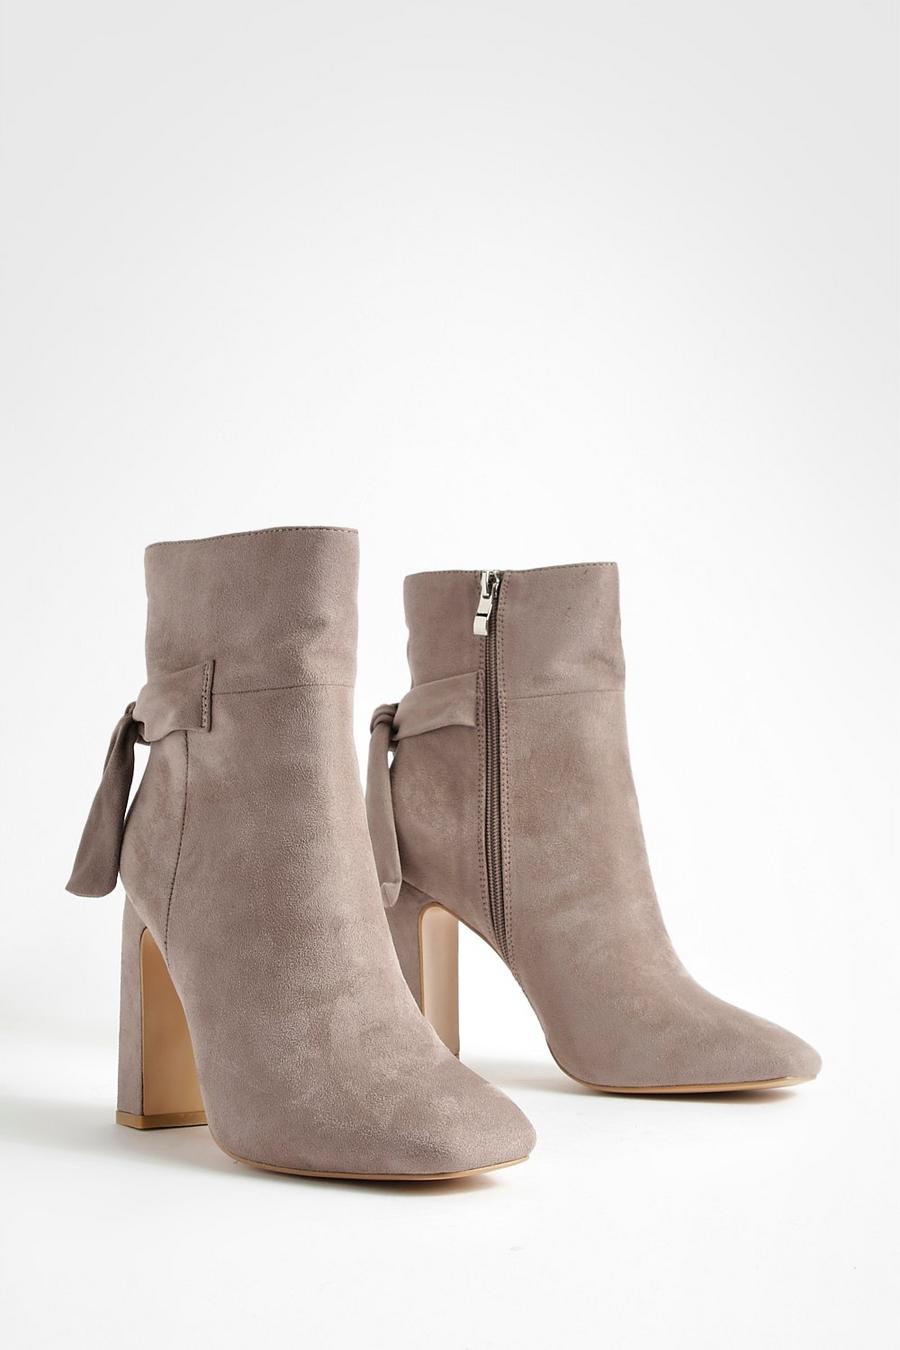 Nude Bow Detail Block Heel Ankle Boots